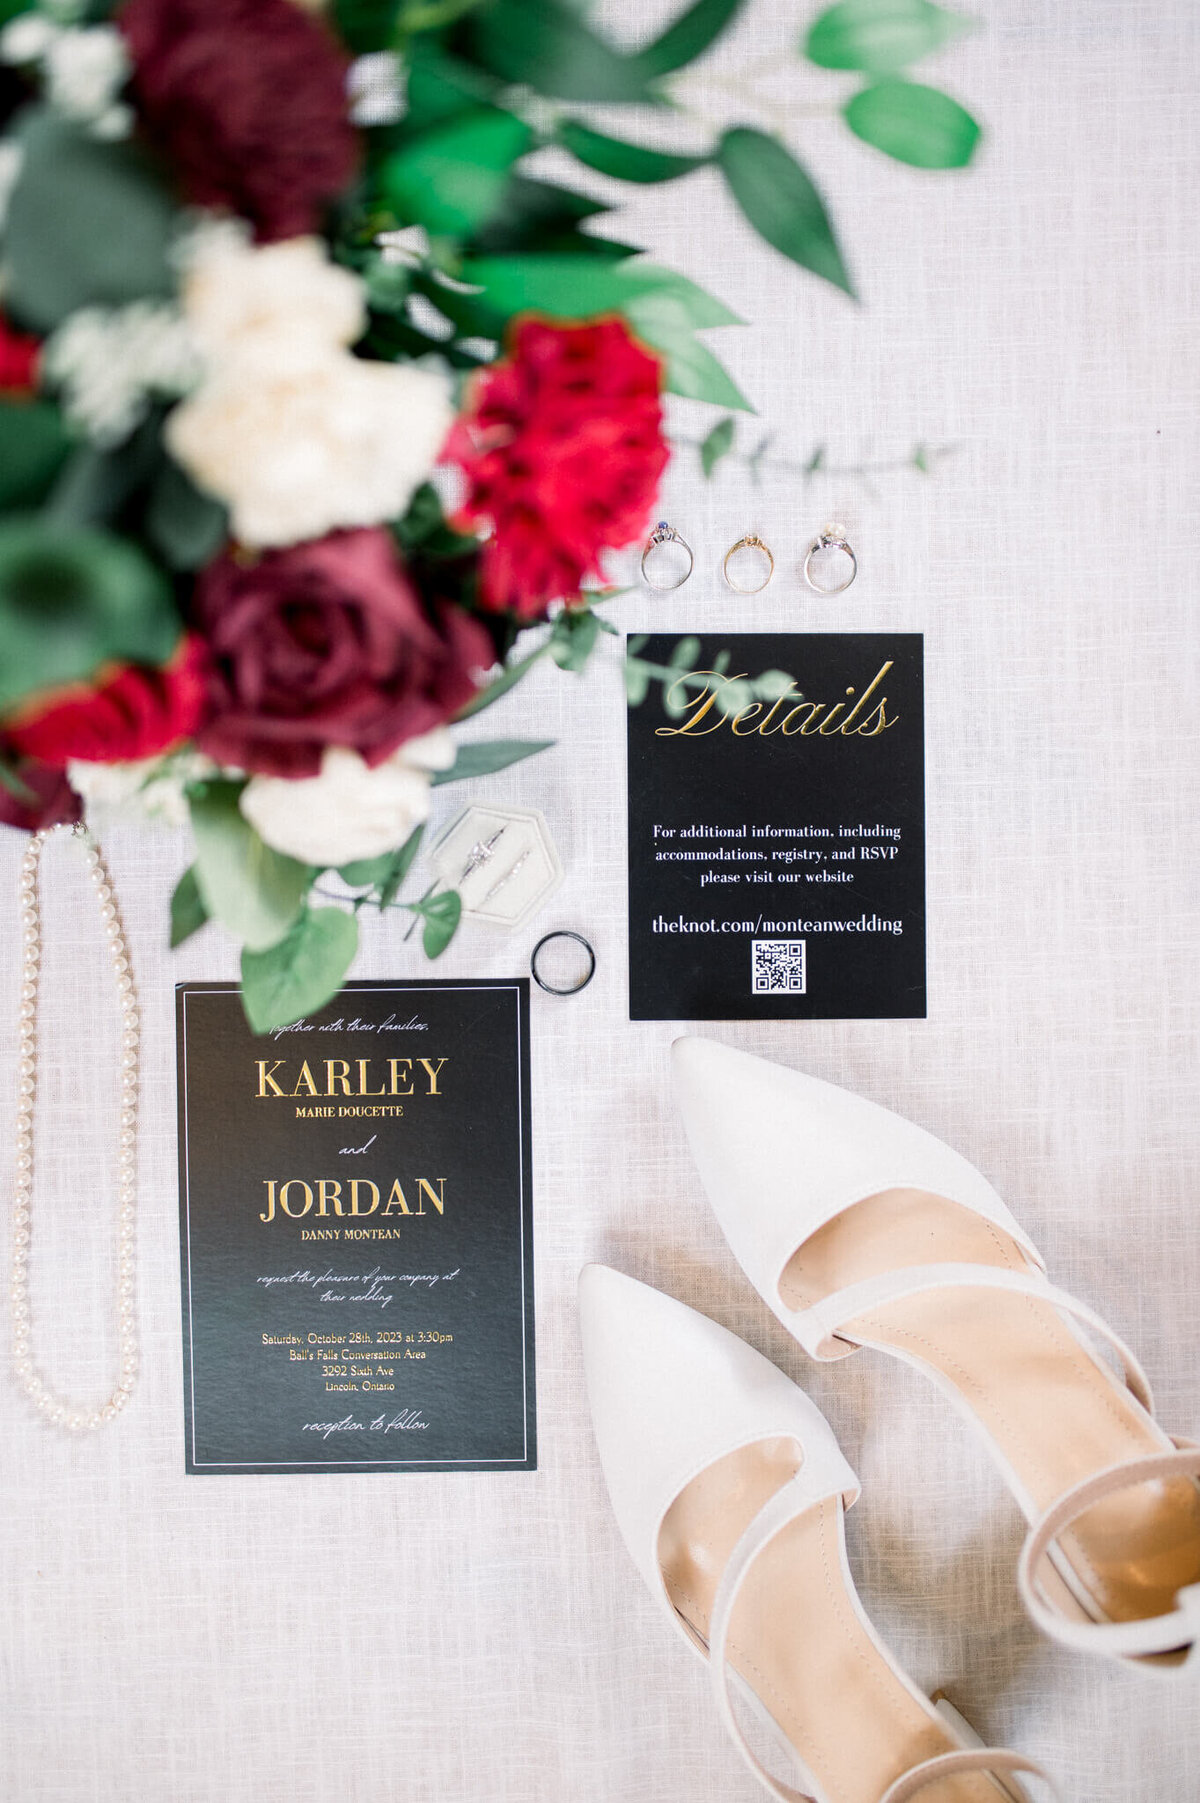 Wedding detail shot of flowers with invitations, shoes and rings. Captured by Niagara wedding photographer.